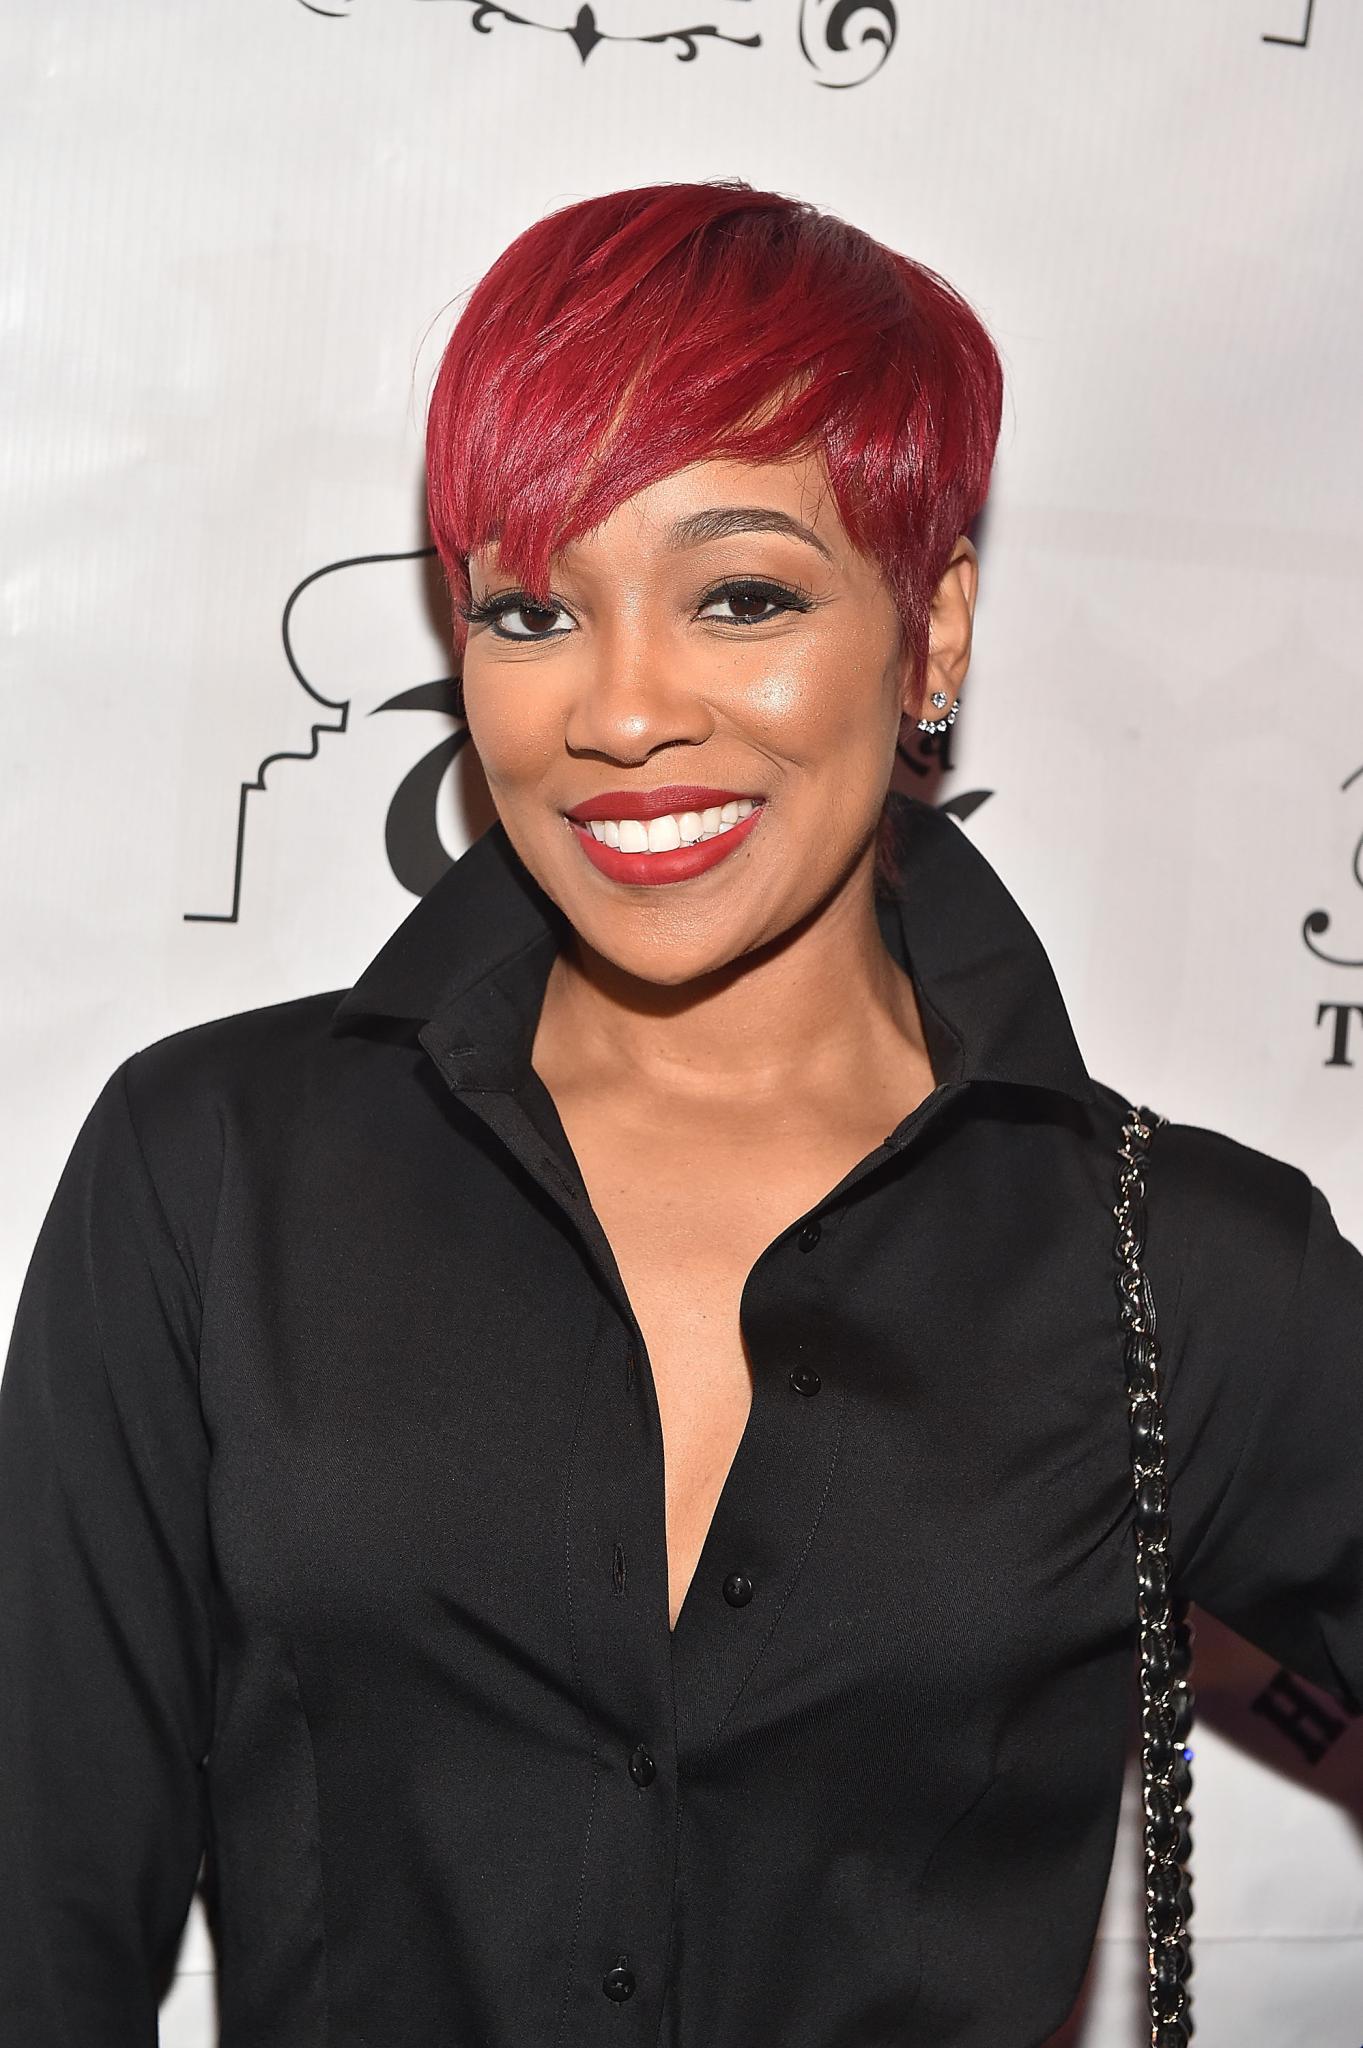 Spotlight on This Short Brush Cut Hairstyle With Intense Red Hair Color